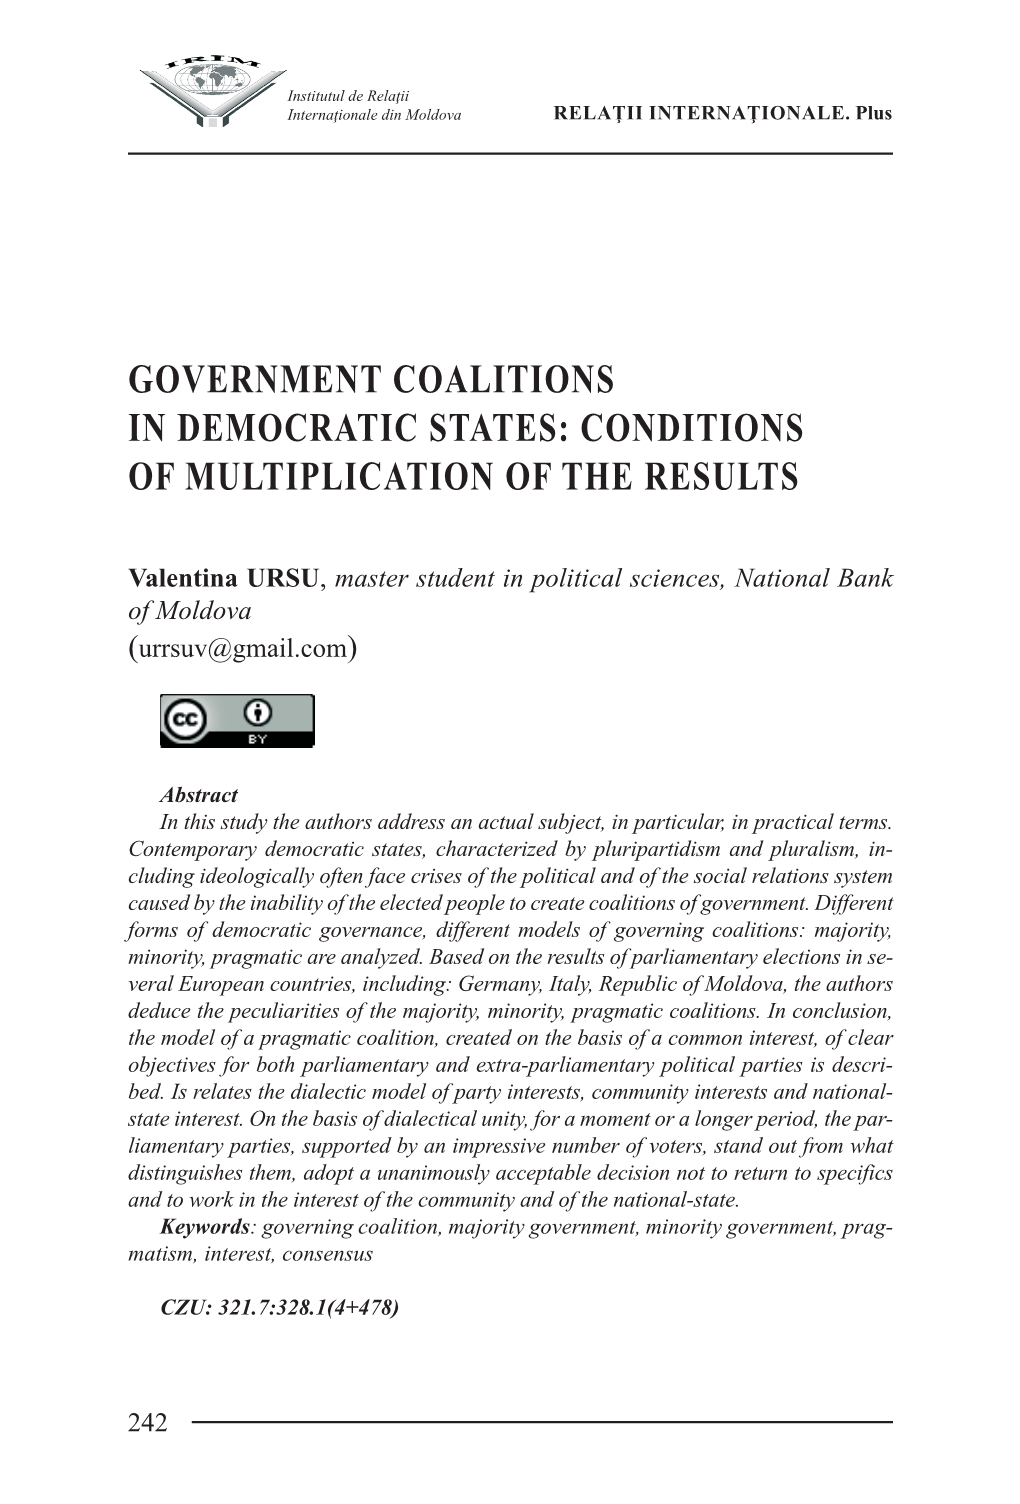 Government Coalitions in Democratic States: Conditions of Multiplication of the Results